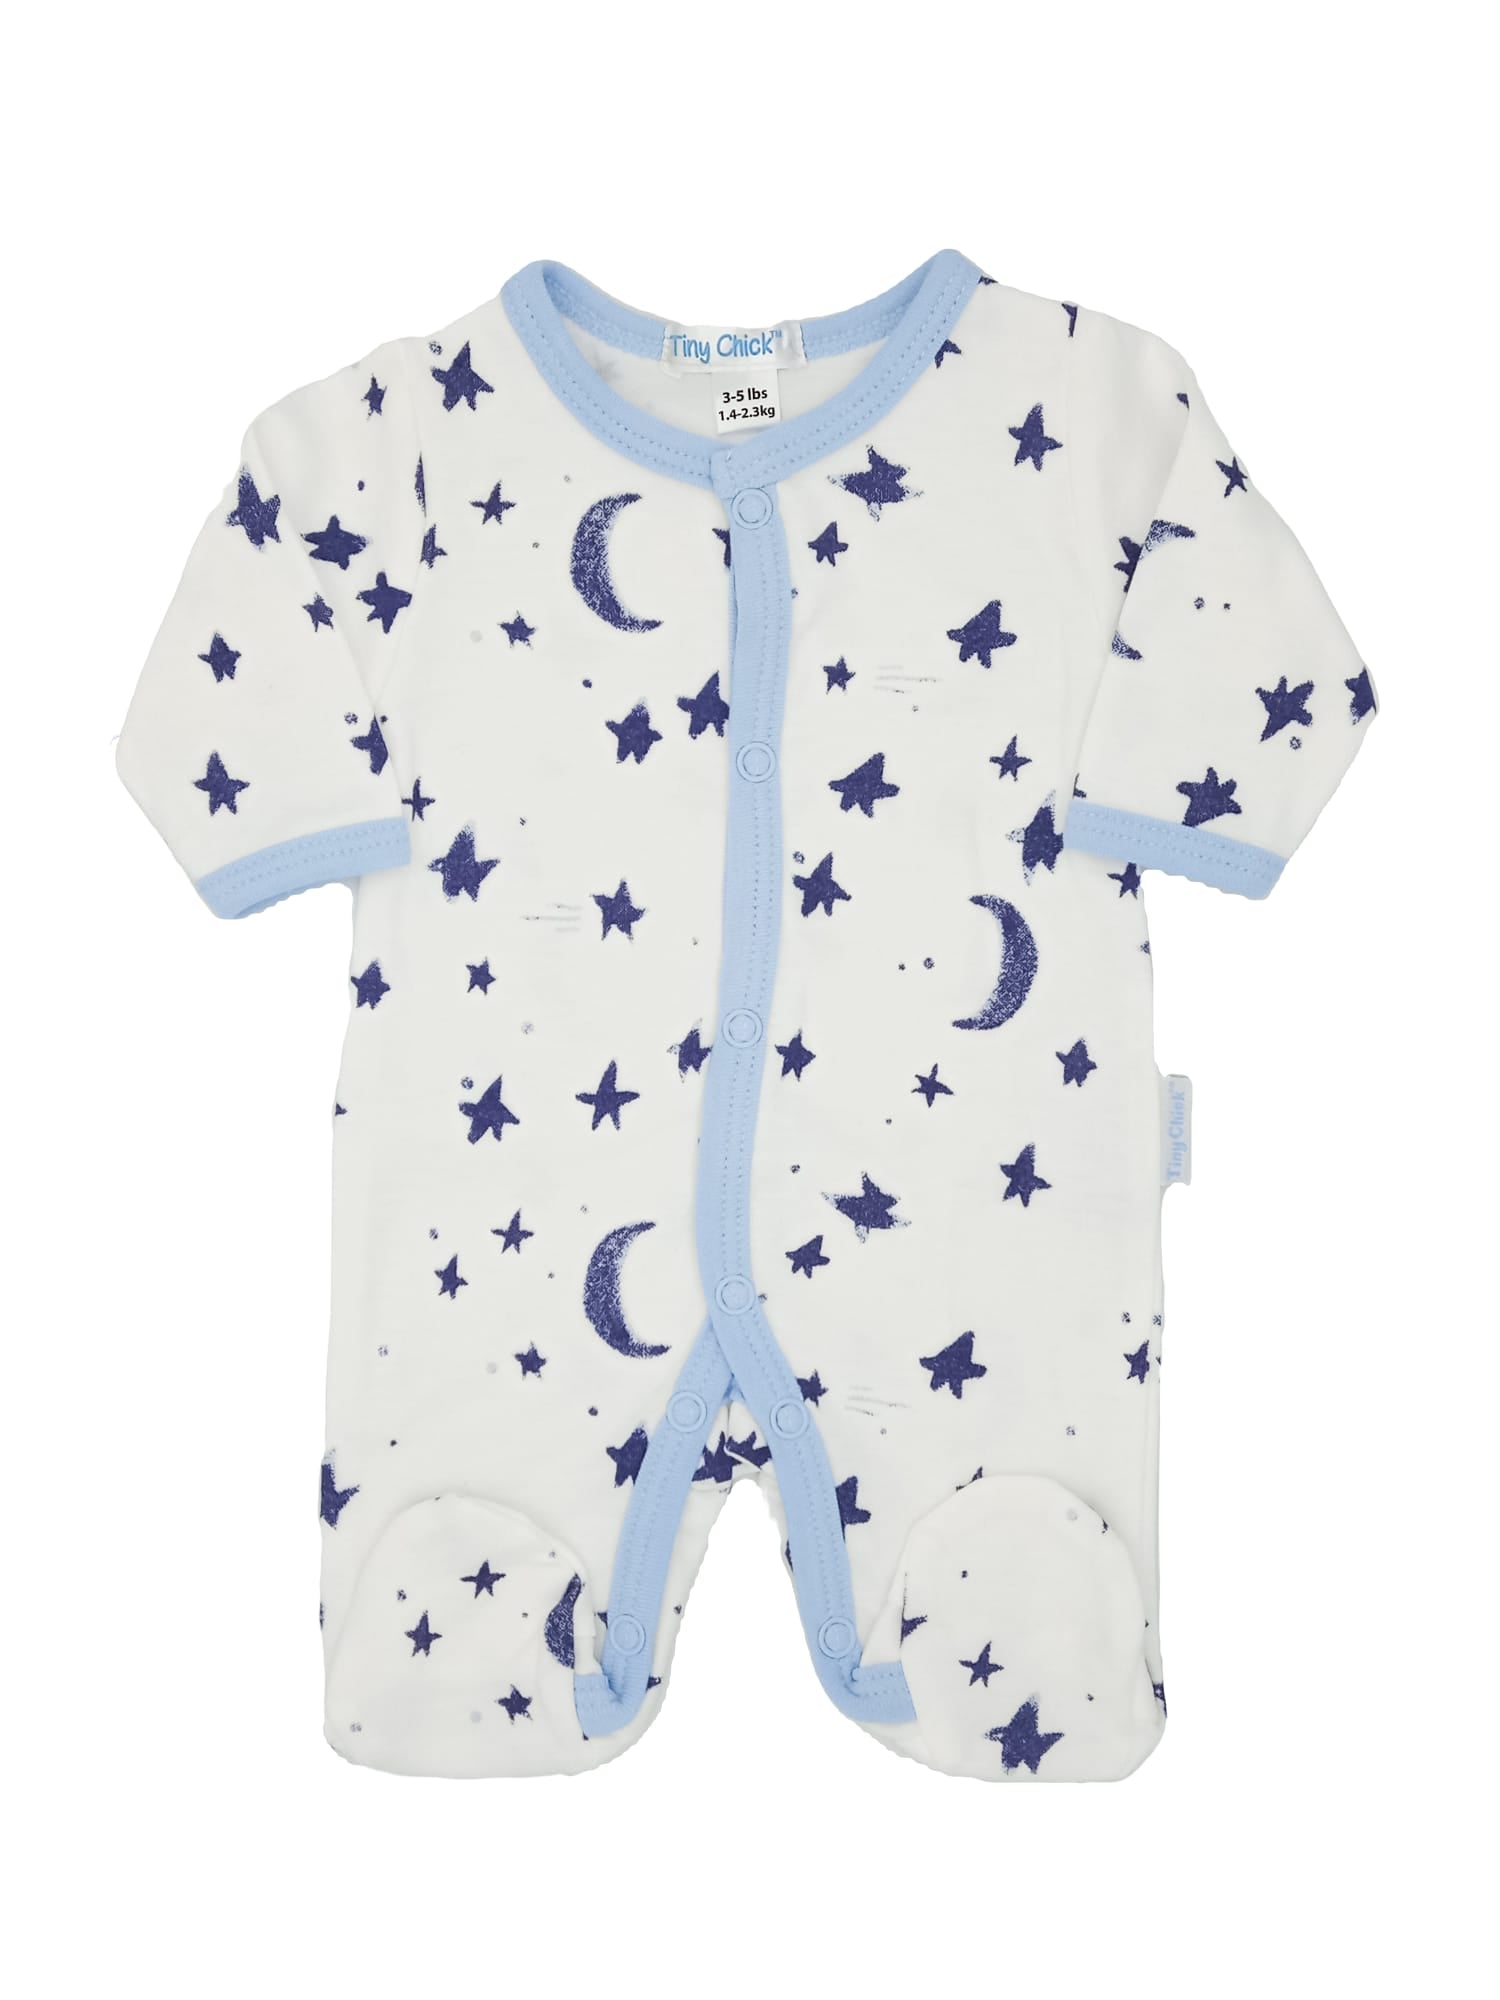 “Reach For The Stars” 4 Piece Set Outift Tiny Chick 